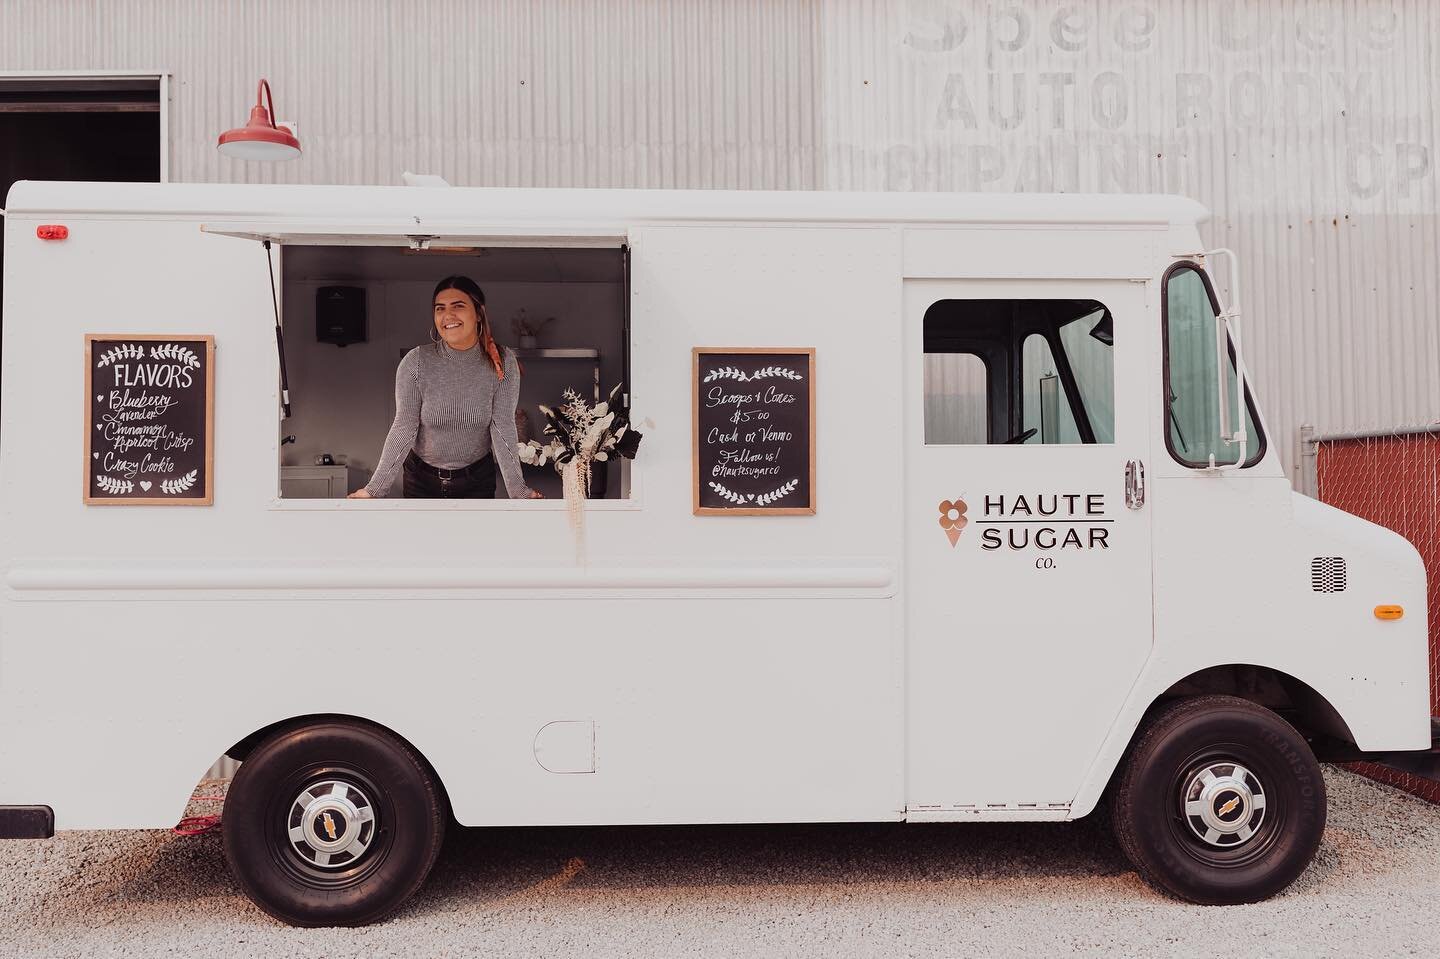 The sweetest ice cream truck there ever was 🍦. And our OG Head Hautie, scoopin&rsquo; pretty! Does it get any better than this!?! #pinchmoi 

.
.
.
.
#icecreamtruck #icecream #eventplanning #catering #cateringservice #scooppretty #hautesugarco #cali